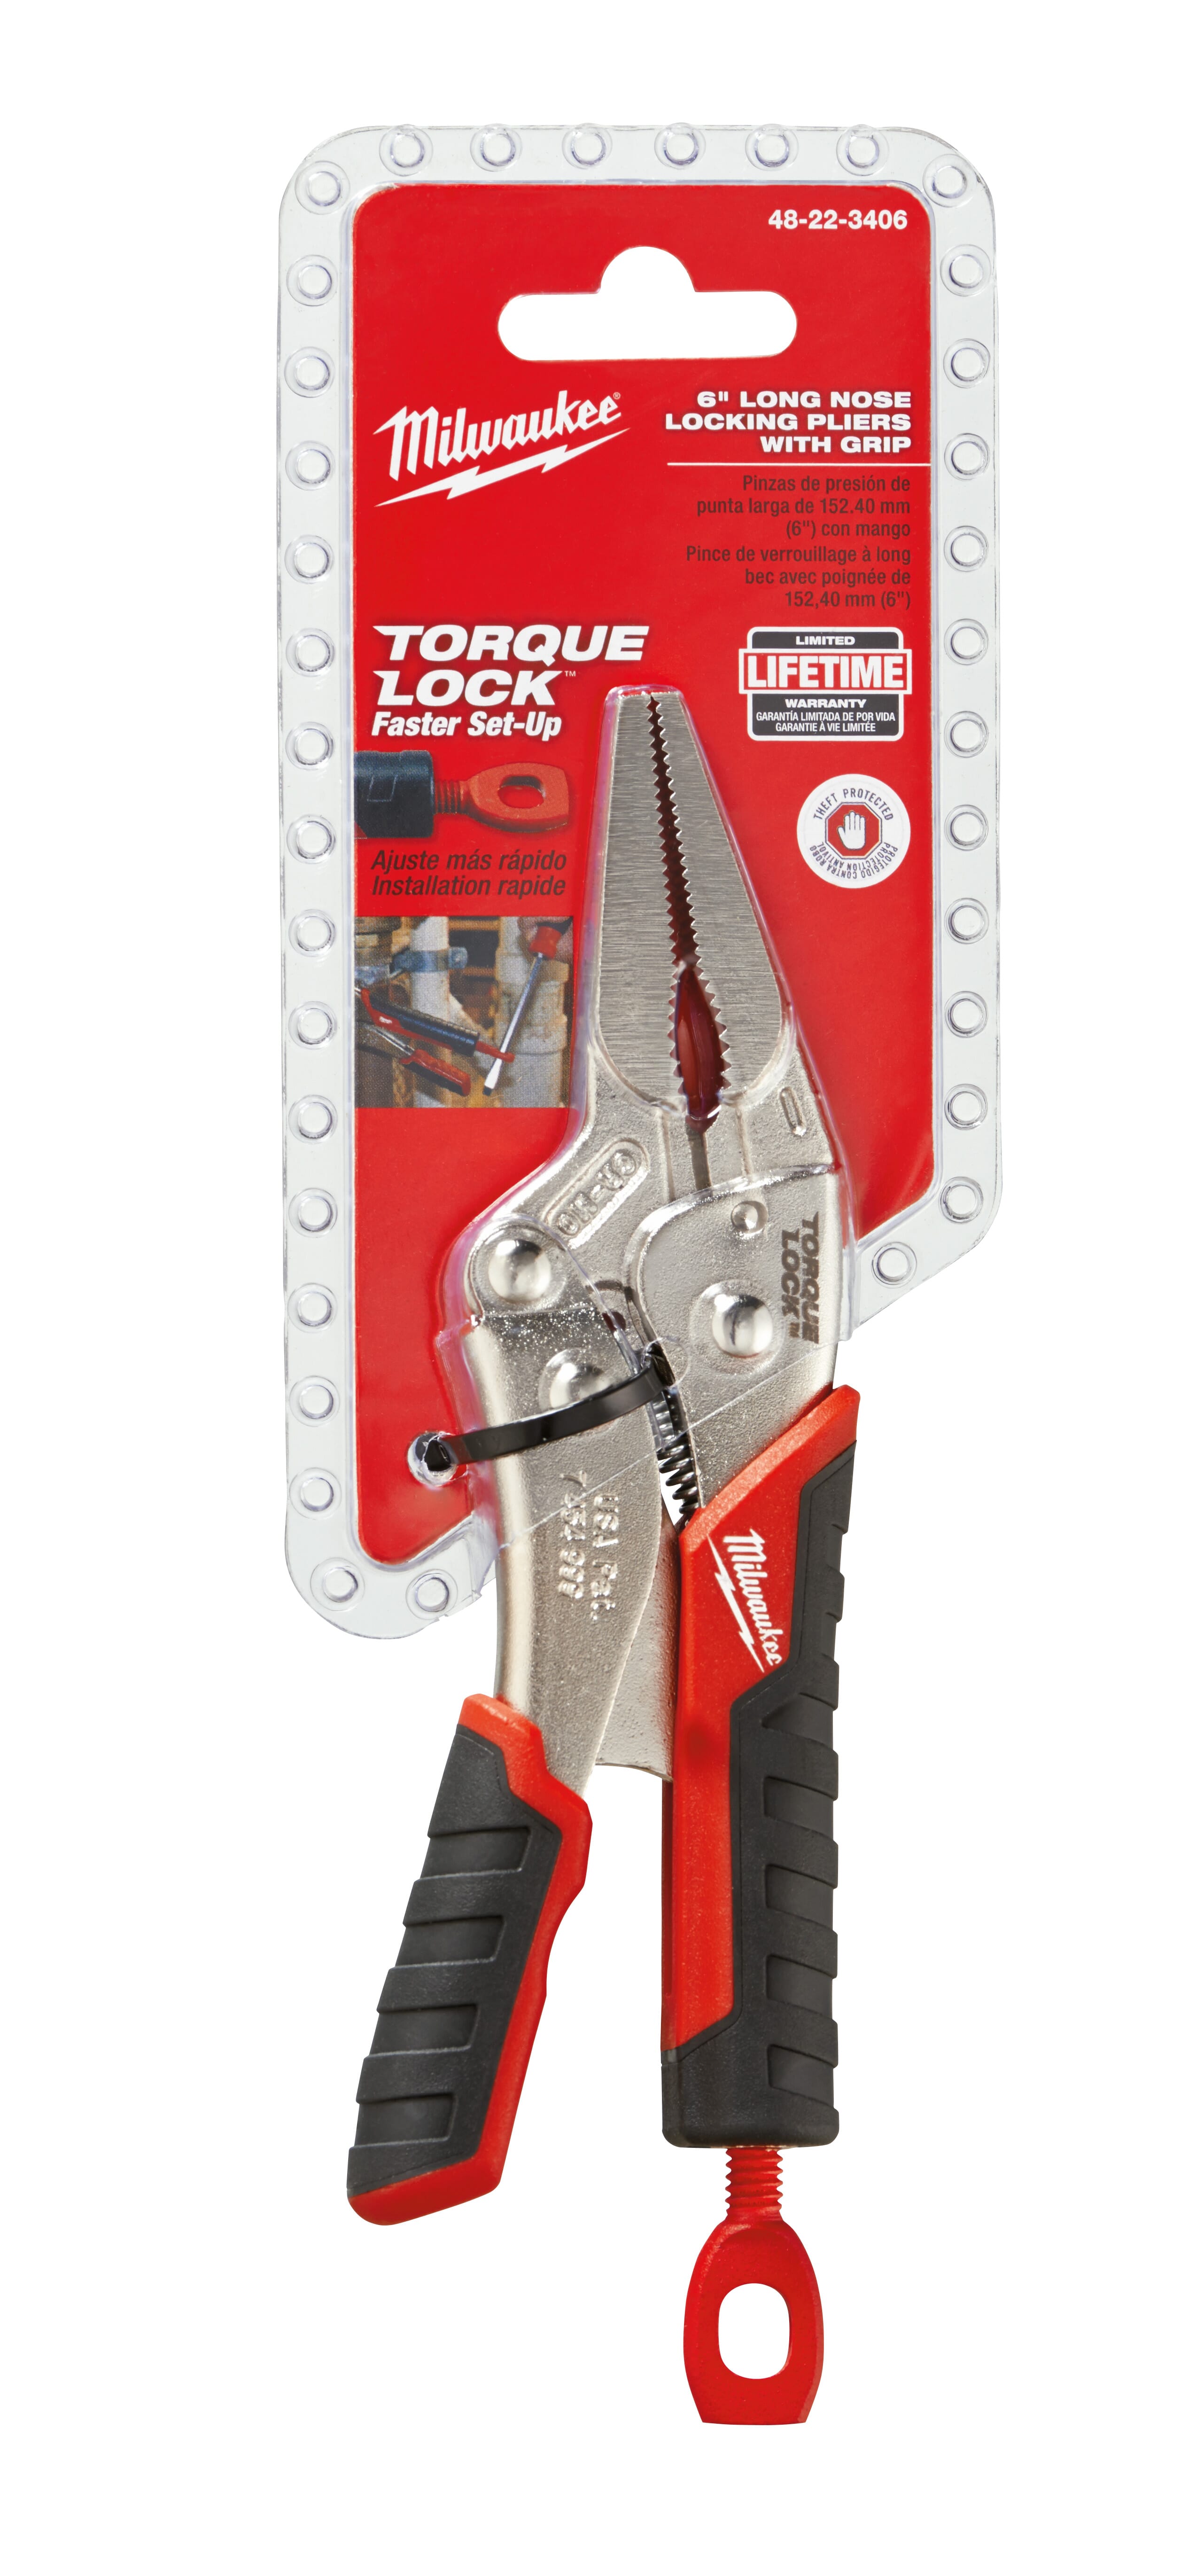 Milwaukee® TORQUE LOCK™ 48-22-3406 1-Handed Lever Locking Plier, 2-13/32 in Nominal, 1-45/64 in L x 3/16 in W x 3/16 in THK Alloy Steel Long Nose Curved Jaw, 6 in OAL